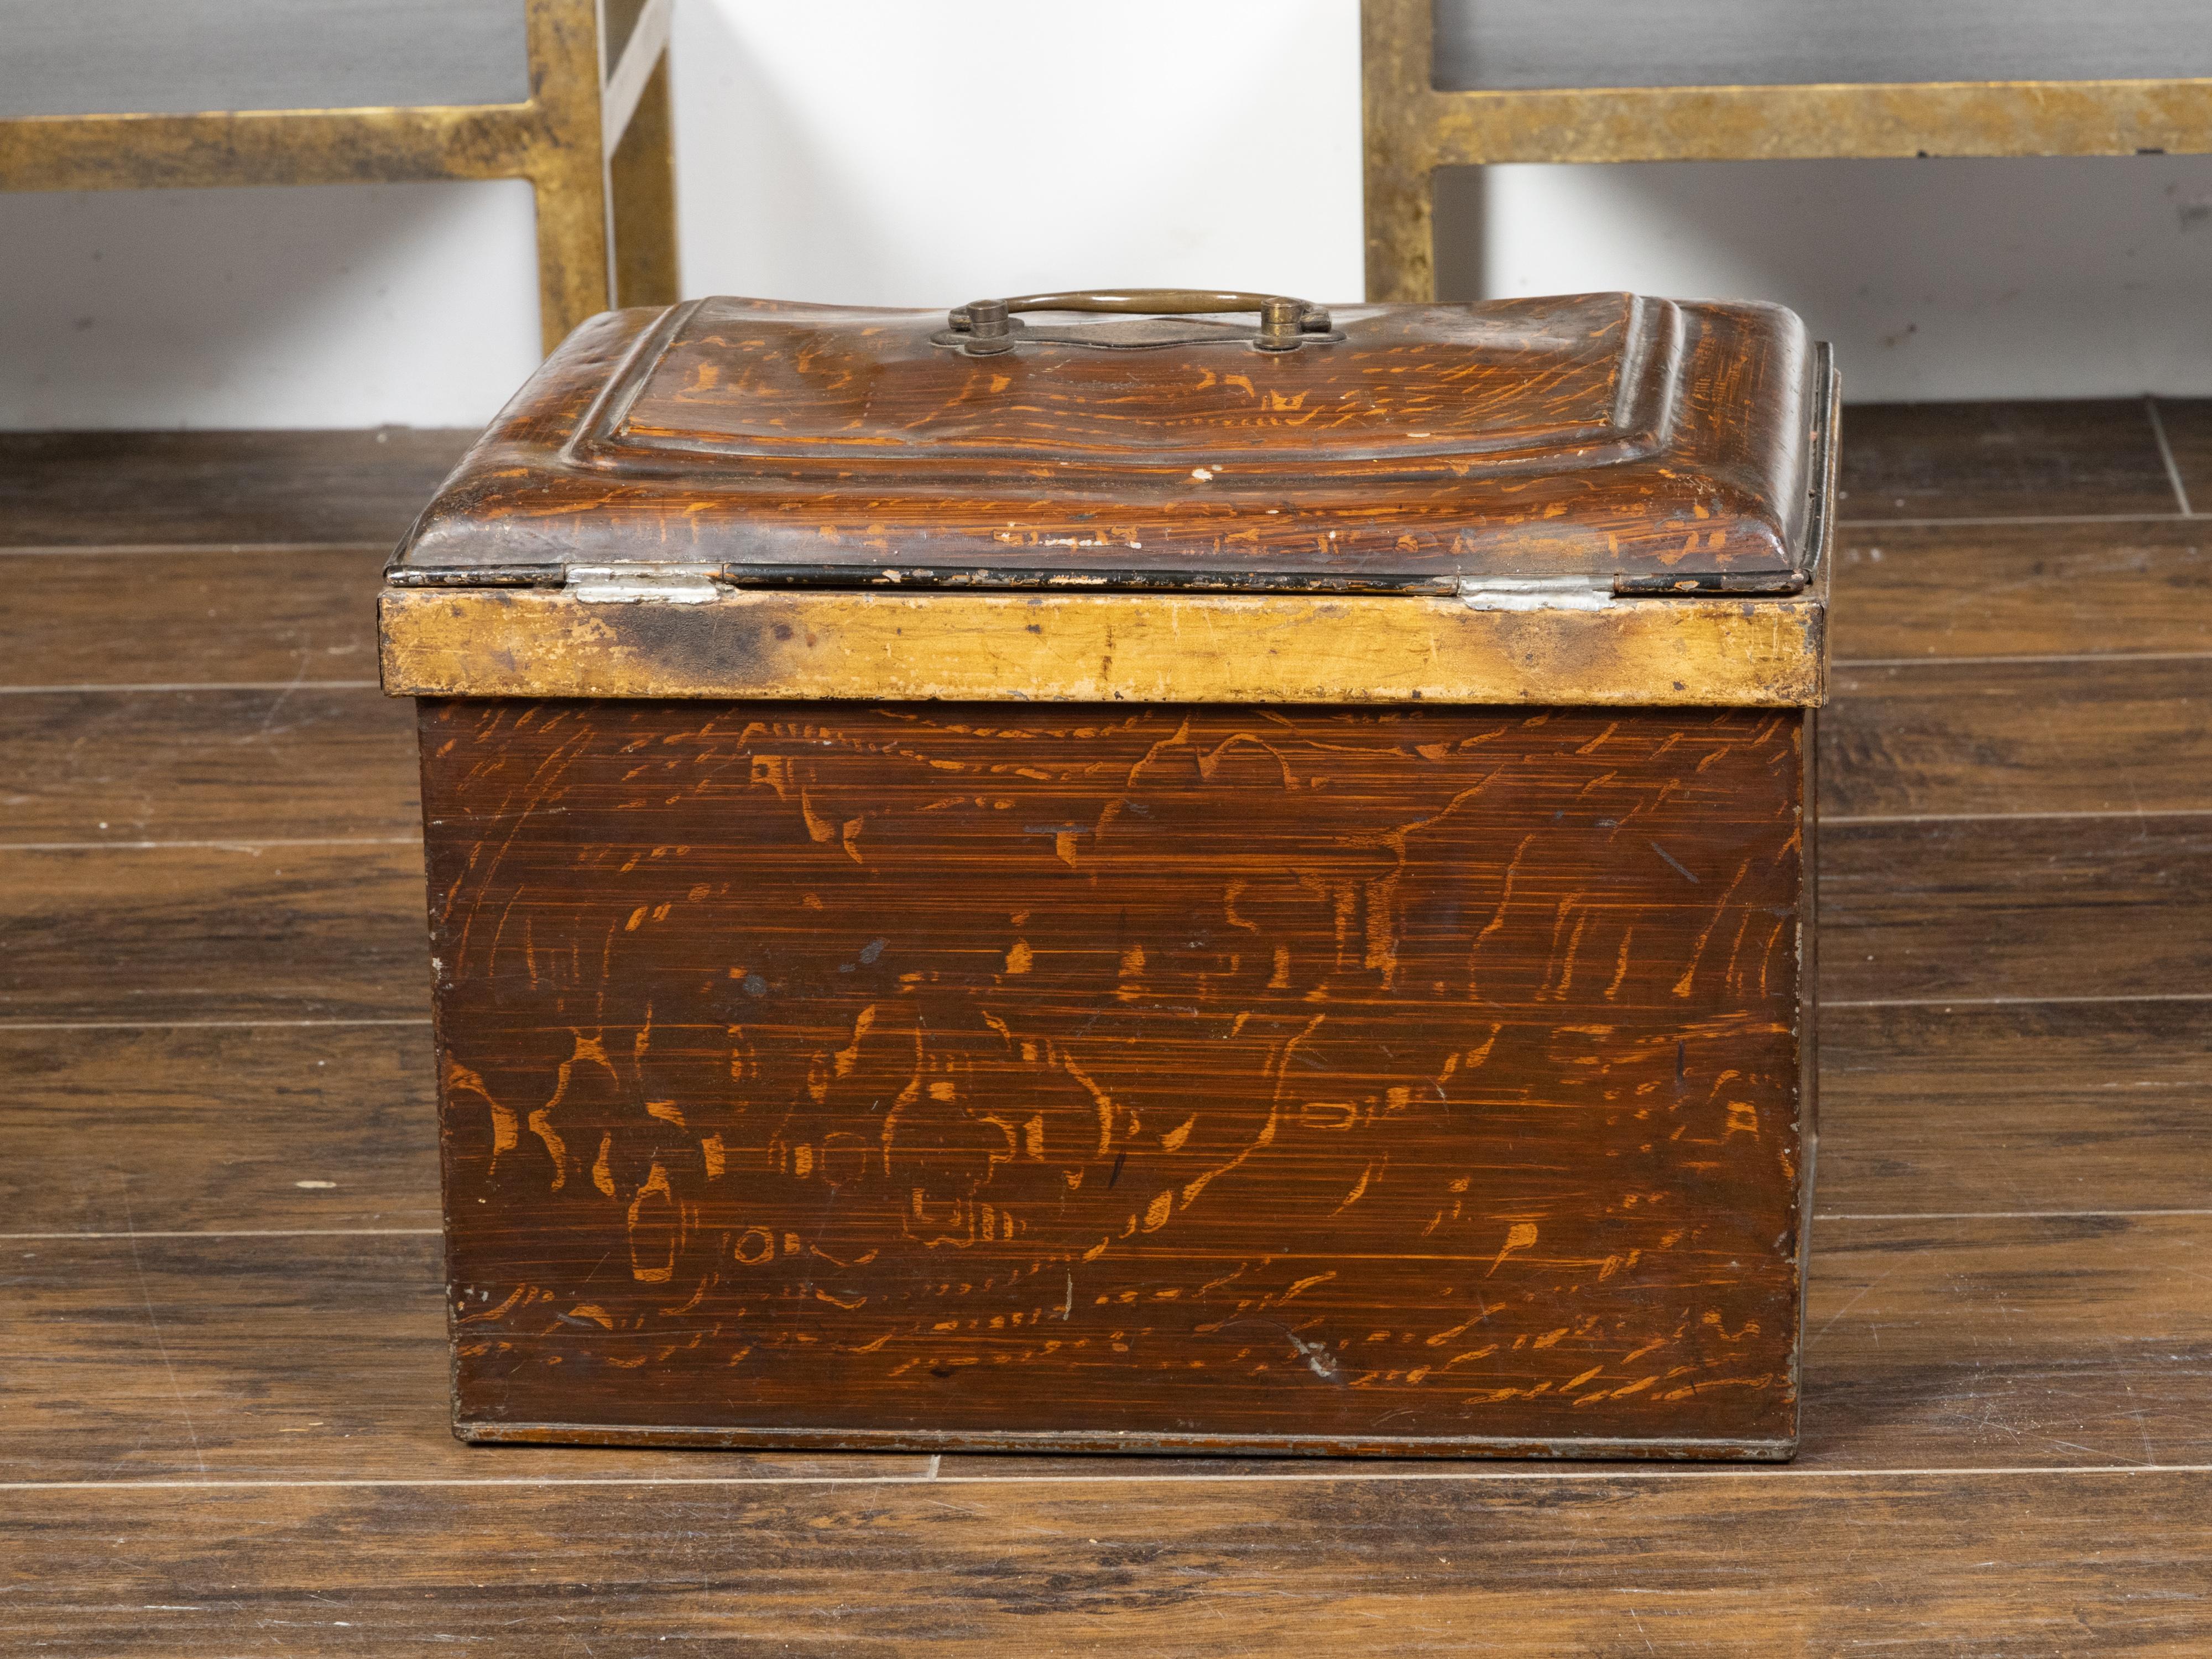 French 1890s Rustic Painted Tôle Box with Wood Grain Finish and Goldenrod Accent For Sale 5